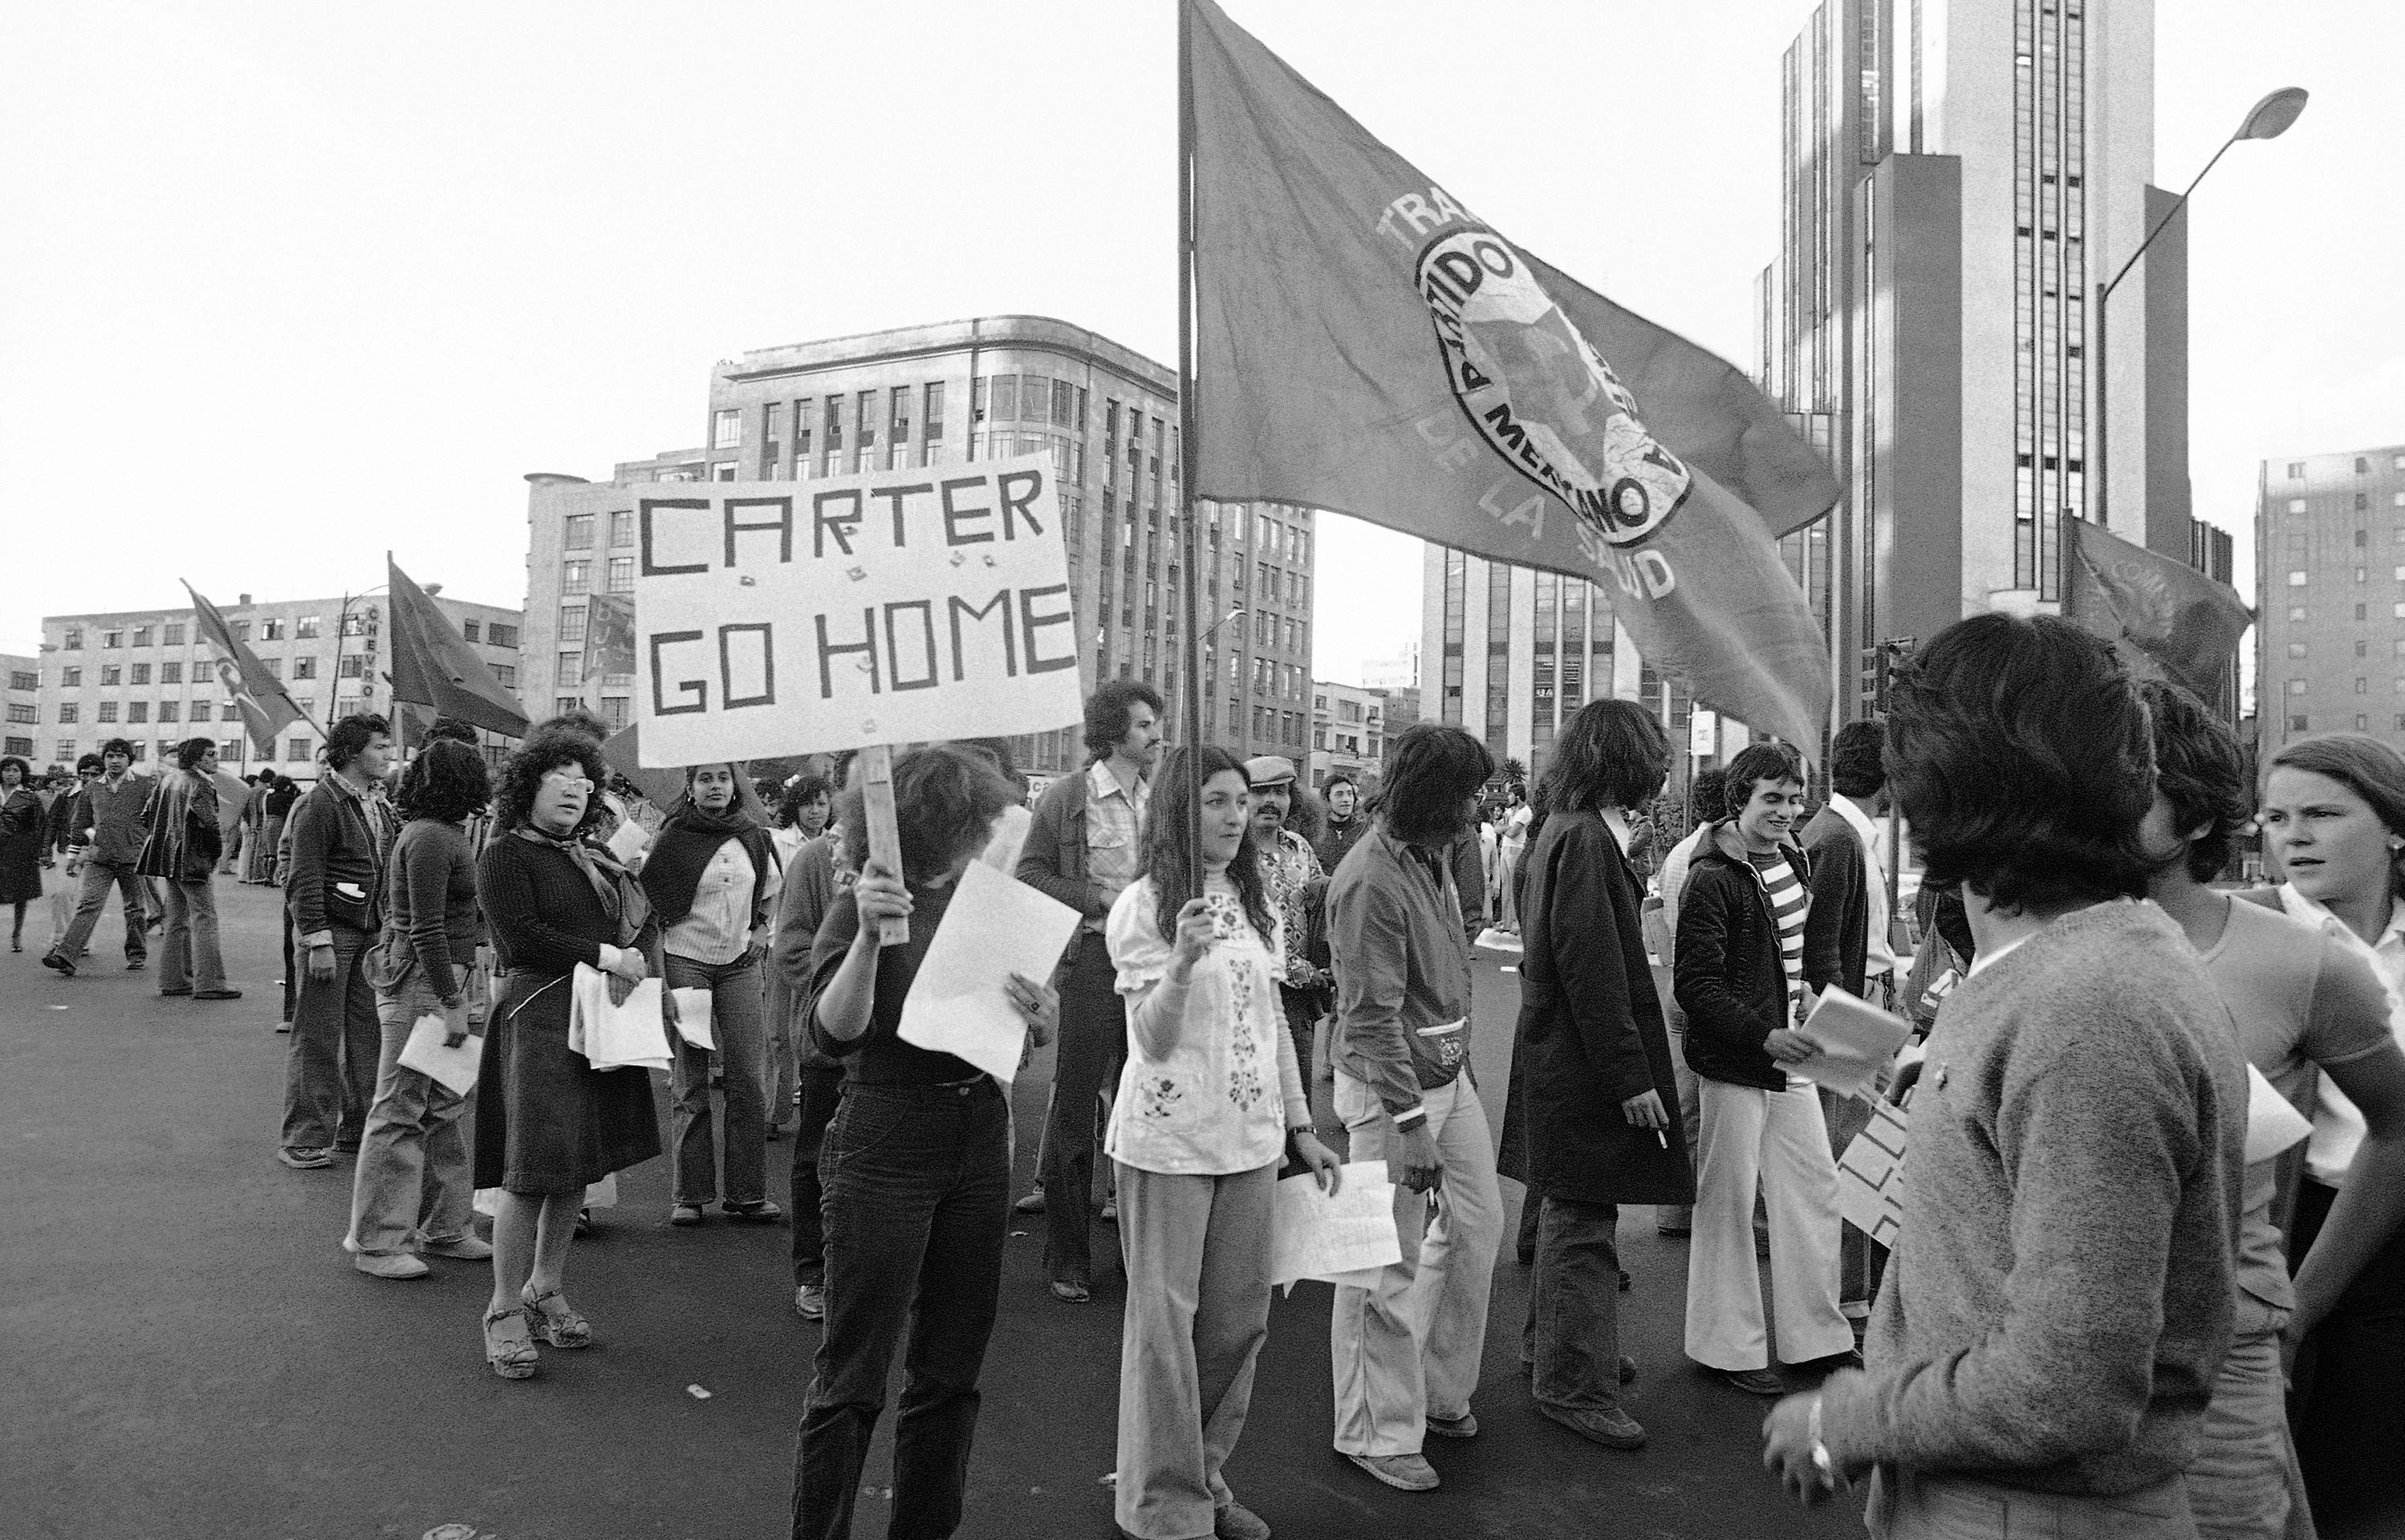 Members of Mexico?s Socialist Workers Party carry placard with anti-Carter slogan in Mexico City, Feb. 7, 1979. March was called by telephone workers protesting for higher wages, but they were joined by 15 to 20 other organizations which focused on Carter?s upcoming visit to Mexico Feb. 14 to 16. Police estimated 5,000 persons took part in the demonstration. (AP Photo/Valente Cotera)